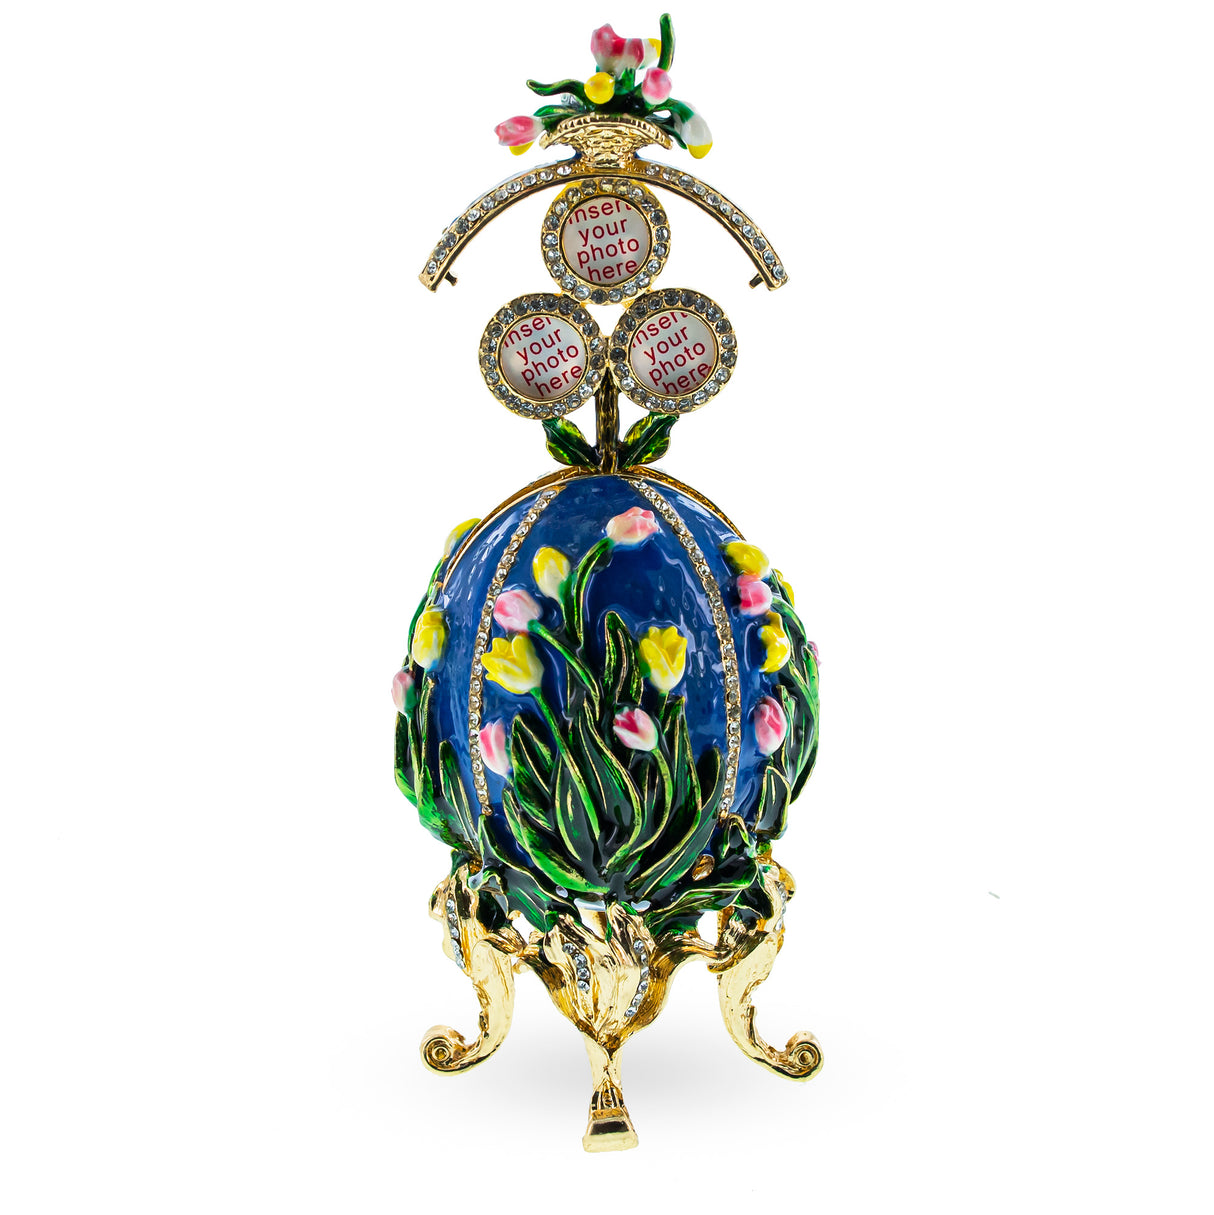 1898 Lilies of the Valley Royal Imperial Easter  Egg 4.75 Inches in Blue color, Oval shape